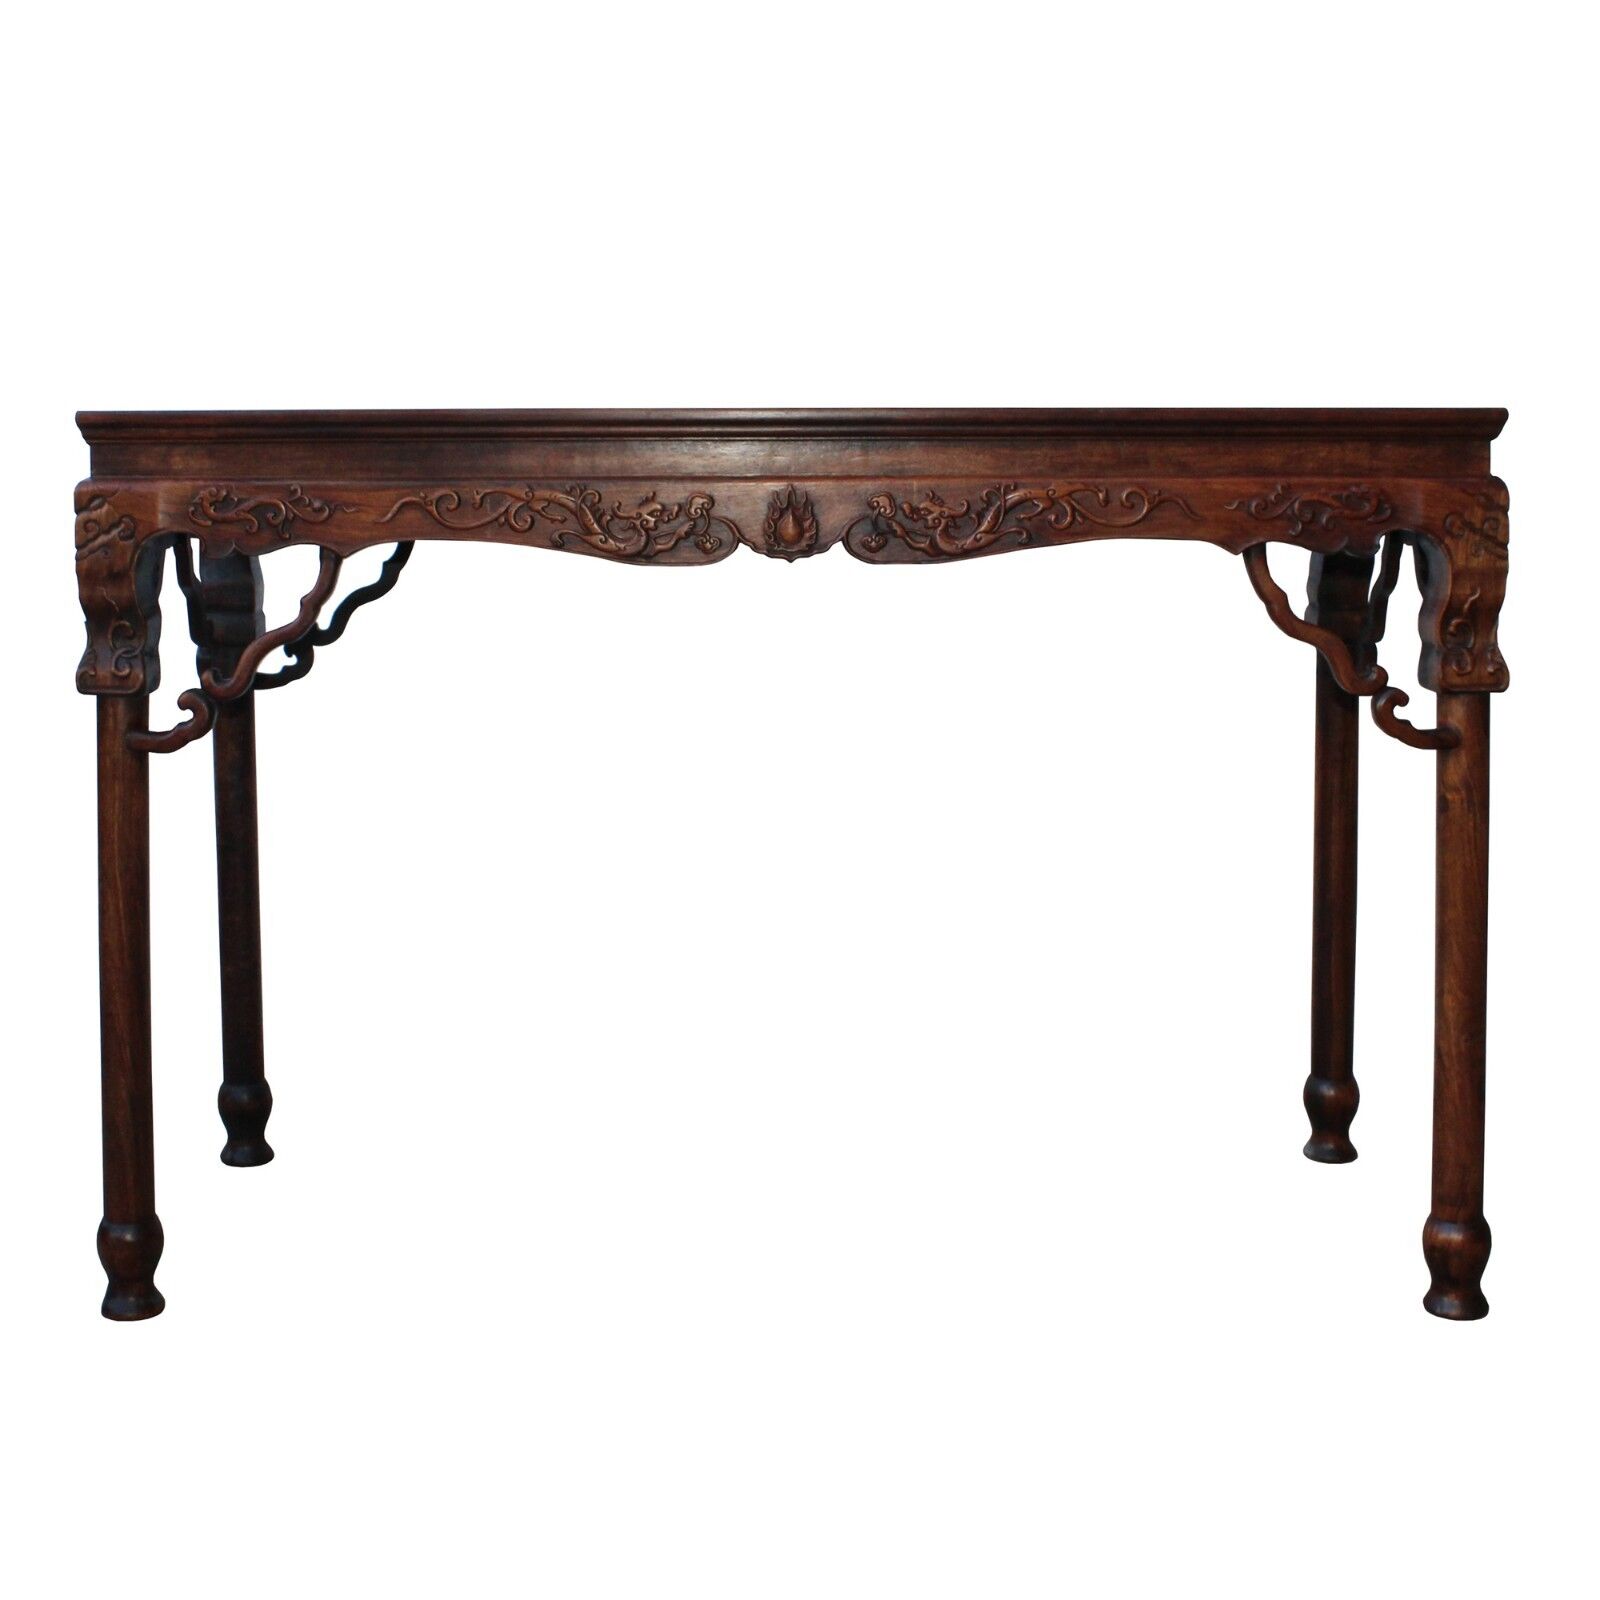 Chinese Brown Huali Rosewood Dragon Motif Round Apron Altar Table cs4534 Handmade Does Not Apply